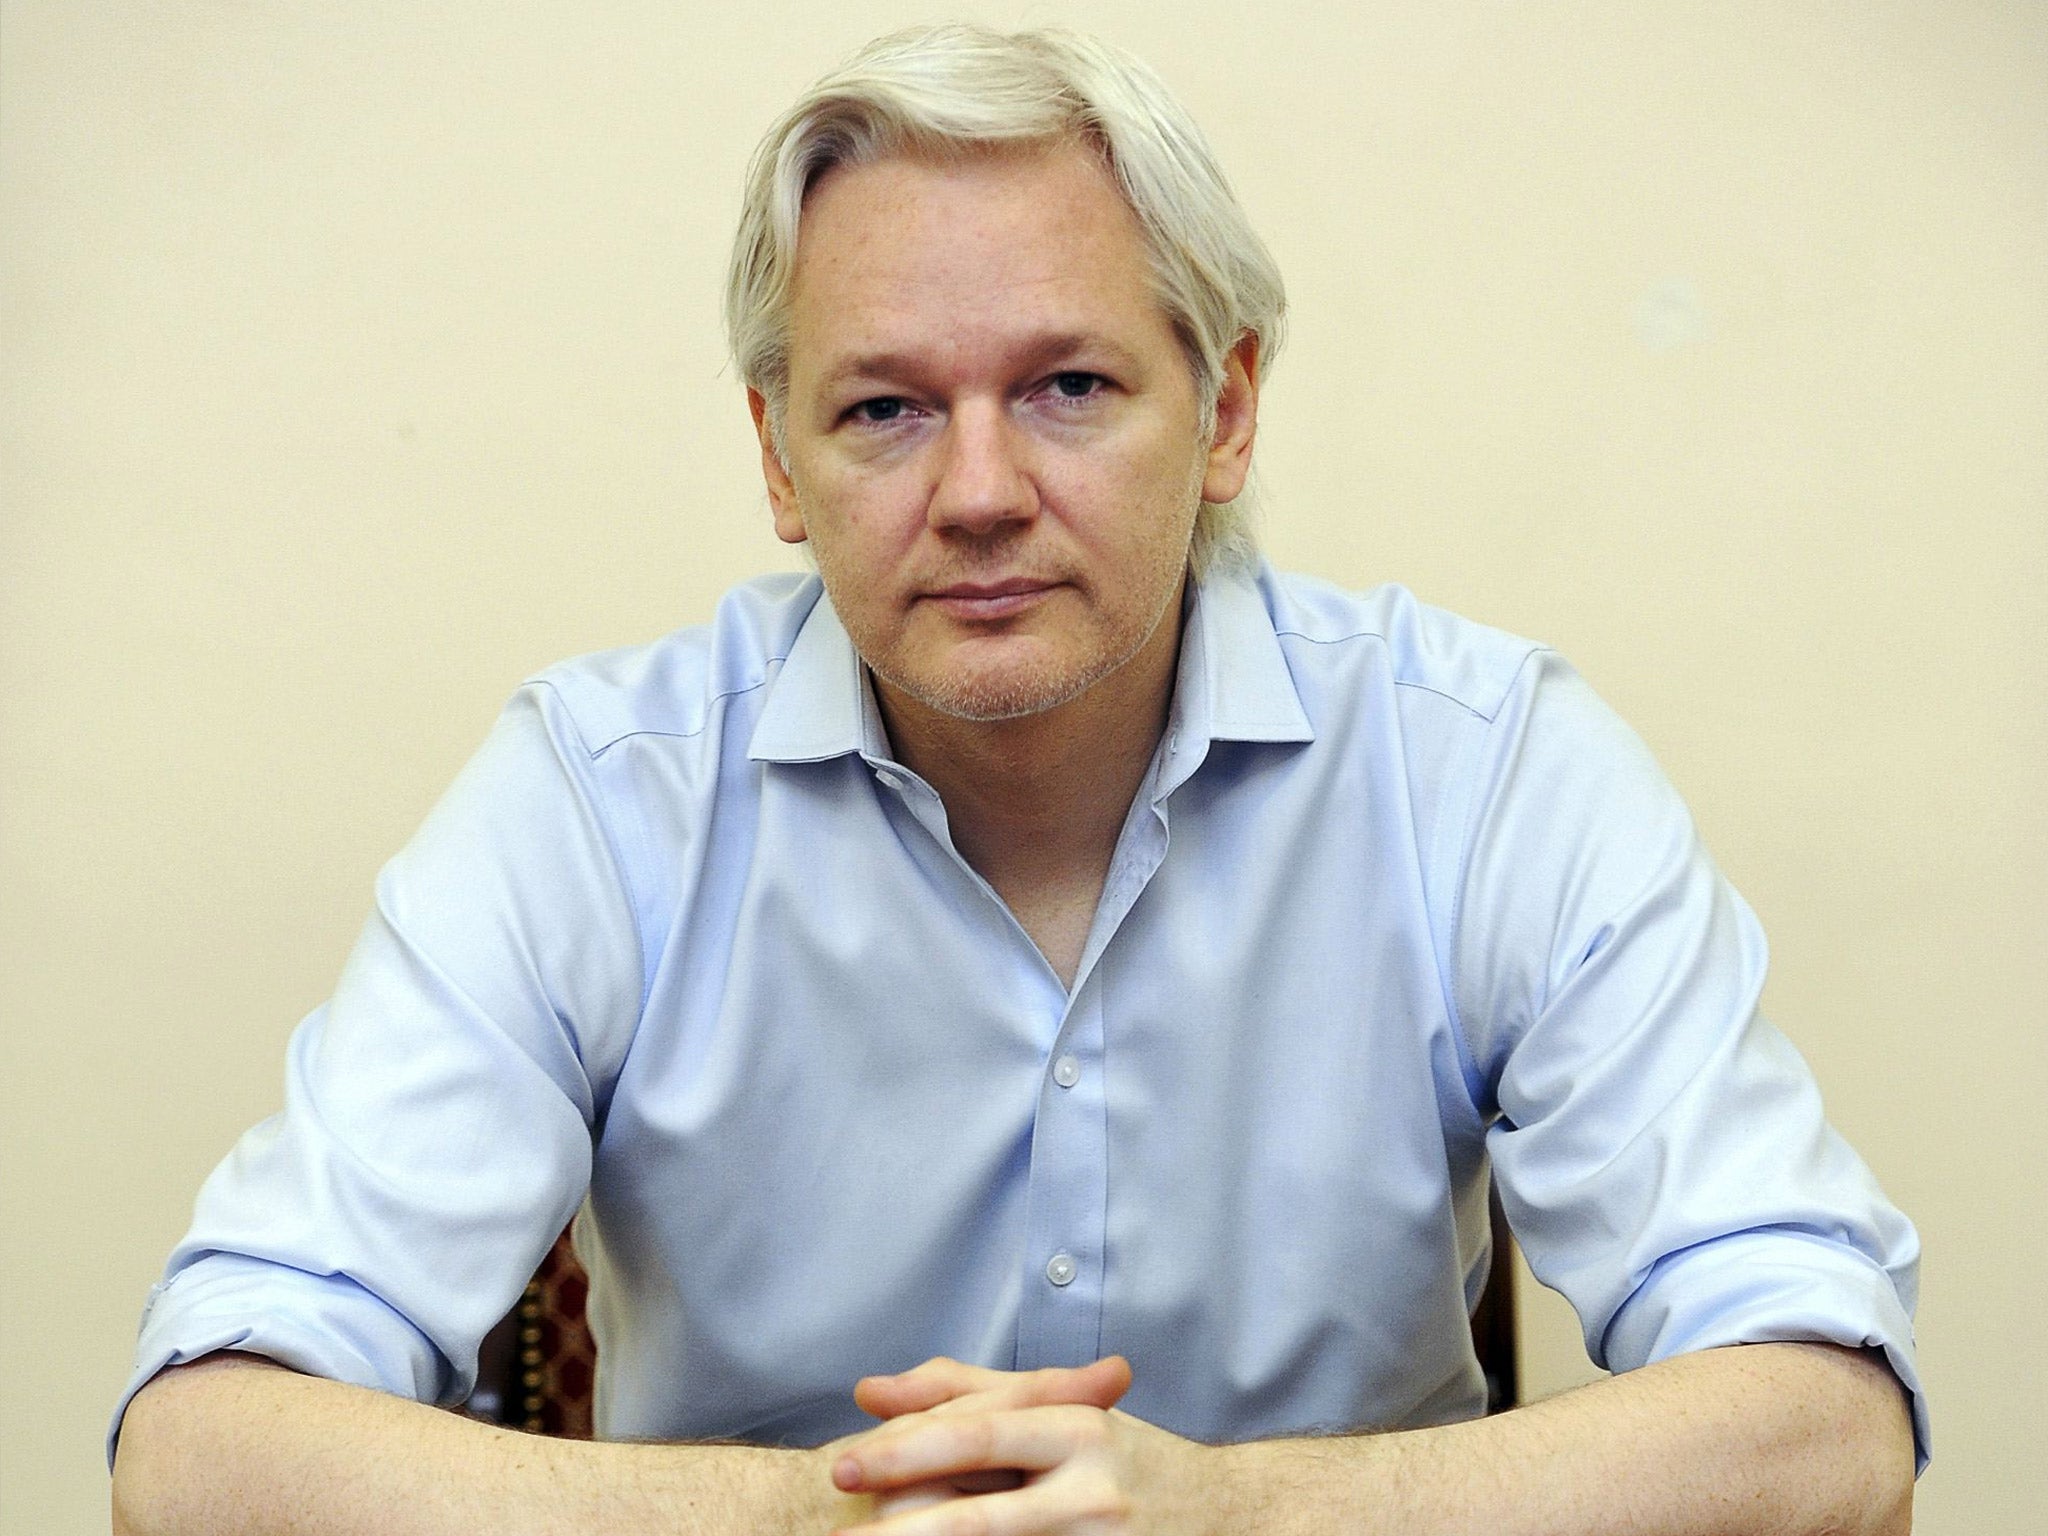 Legal experts warn that Julian Assange walk free while the Government deals with EU formalities